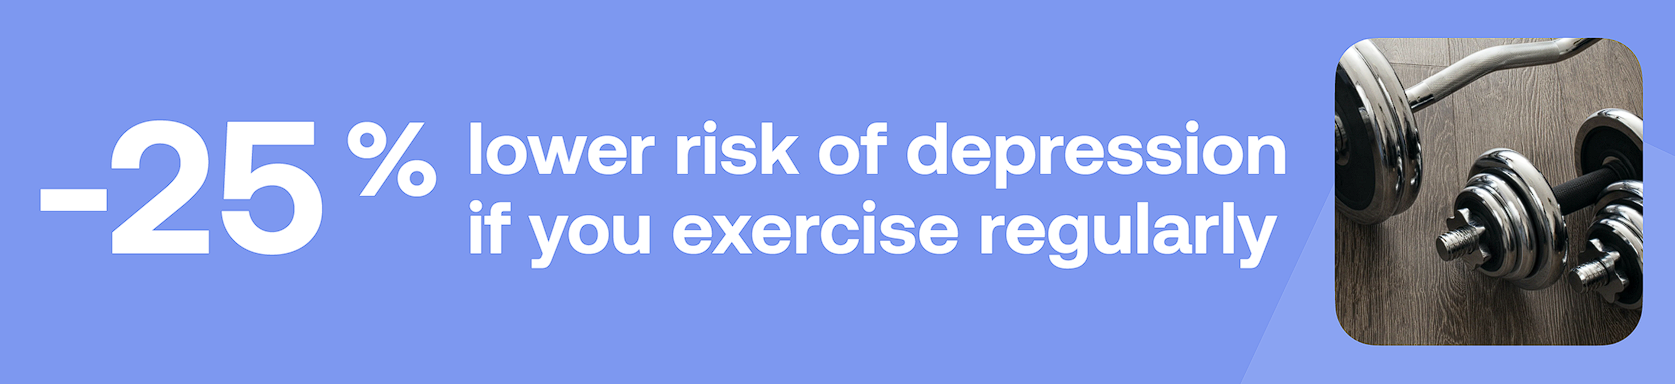 -25% lower risk of depression if you exercise regularly